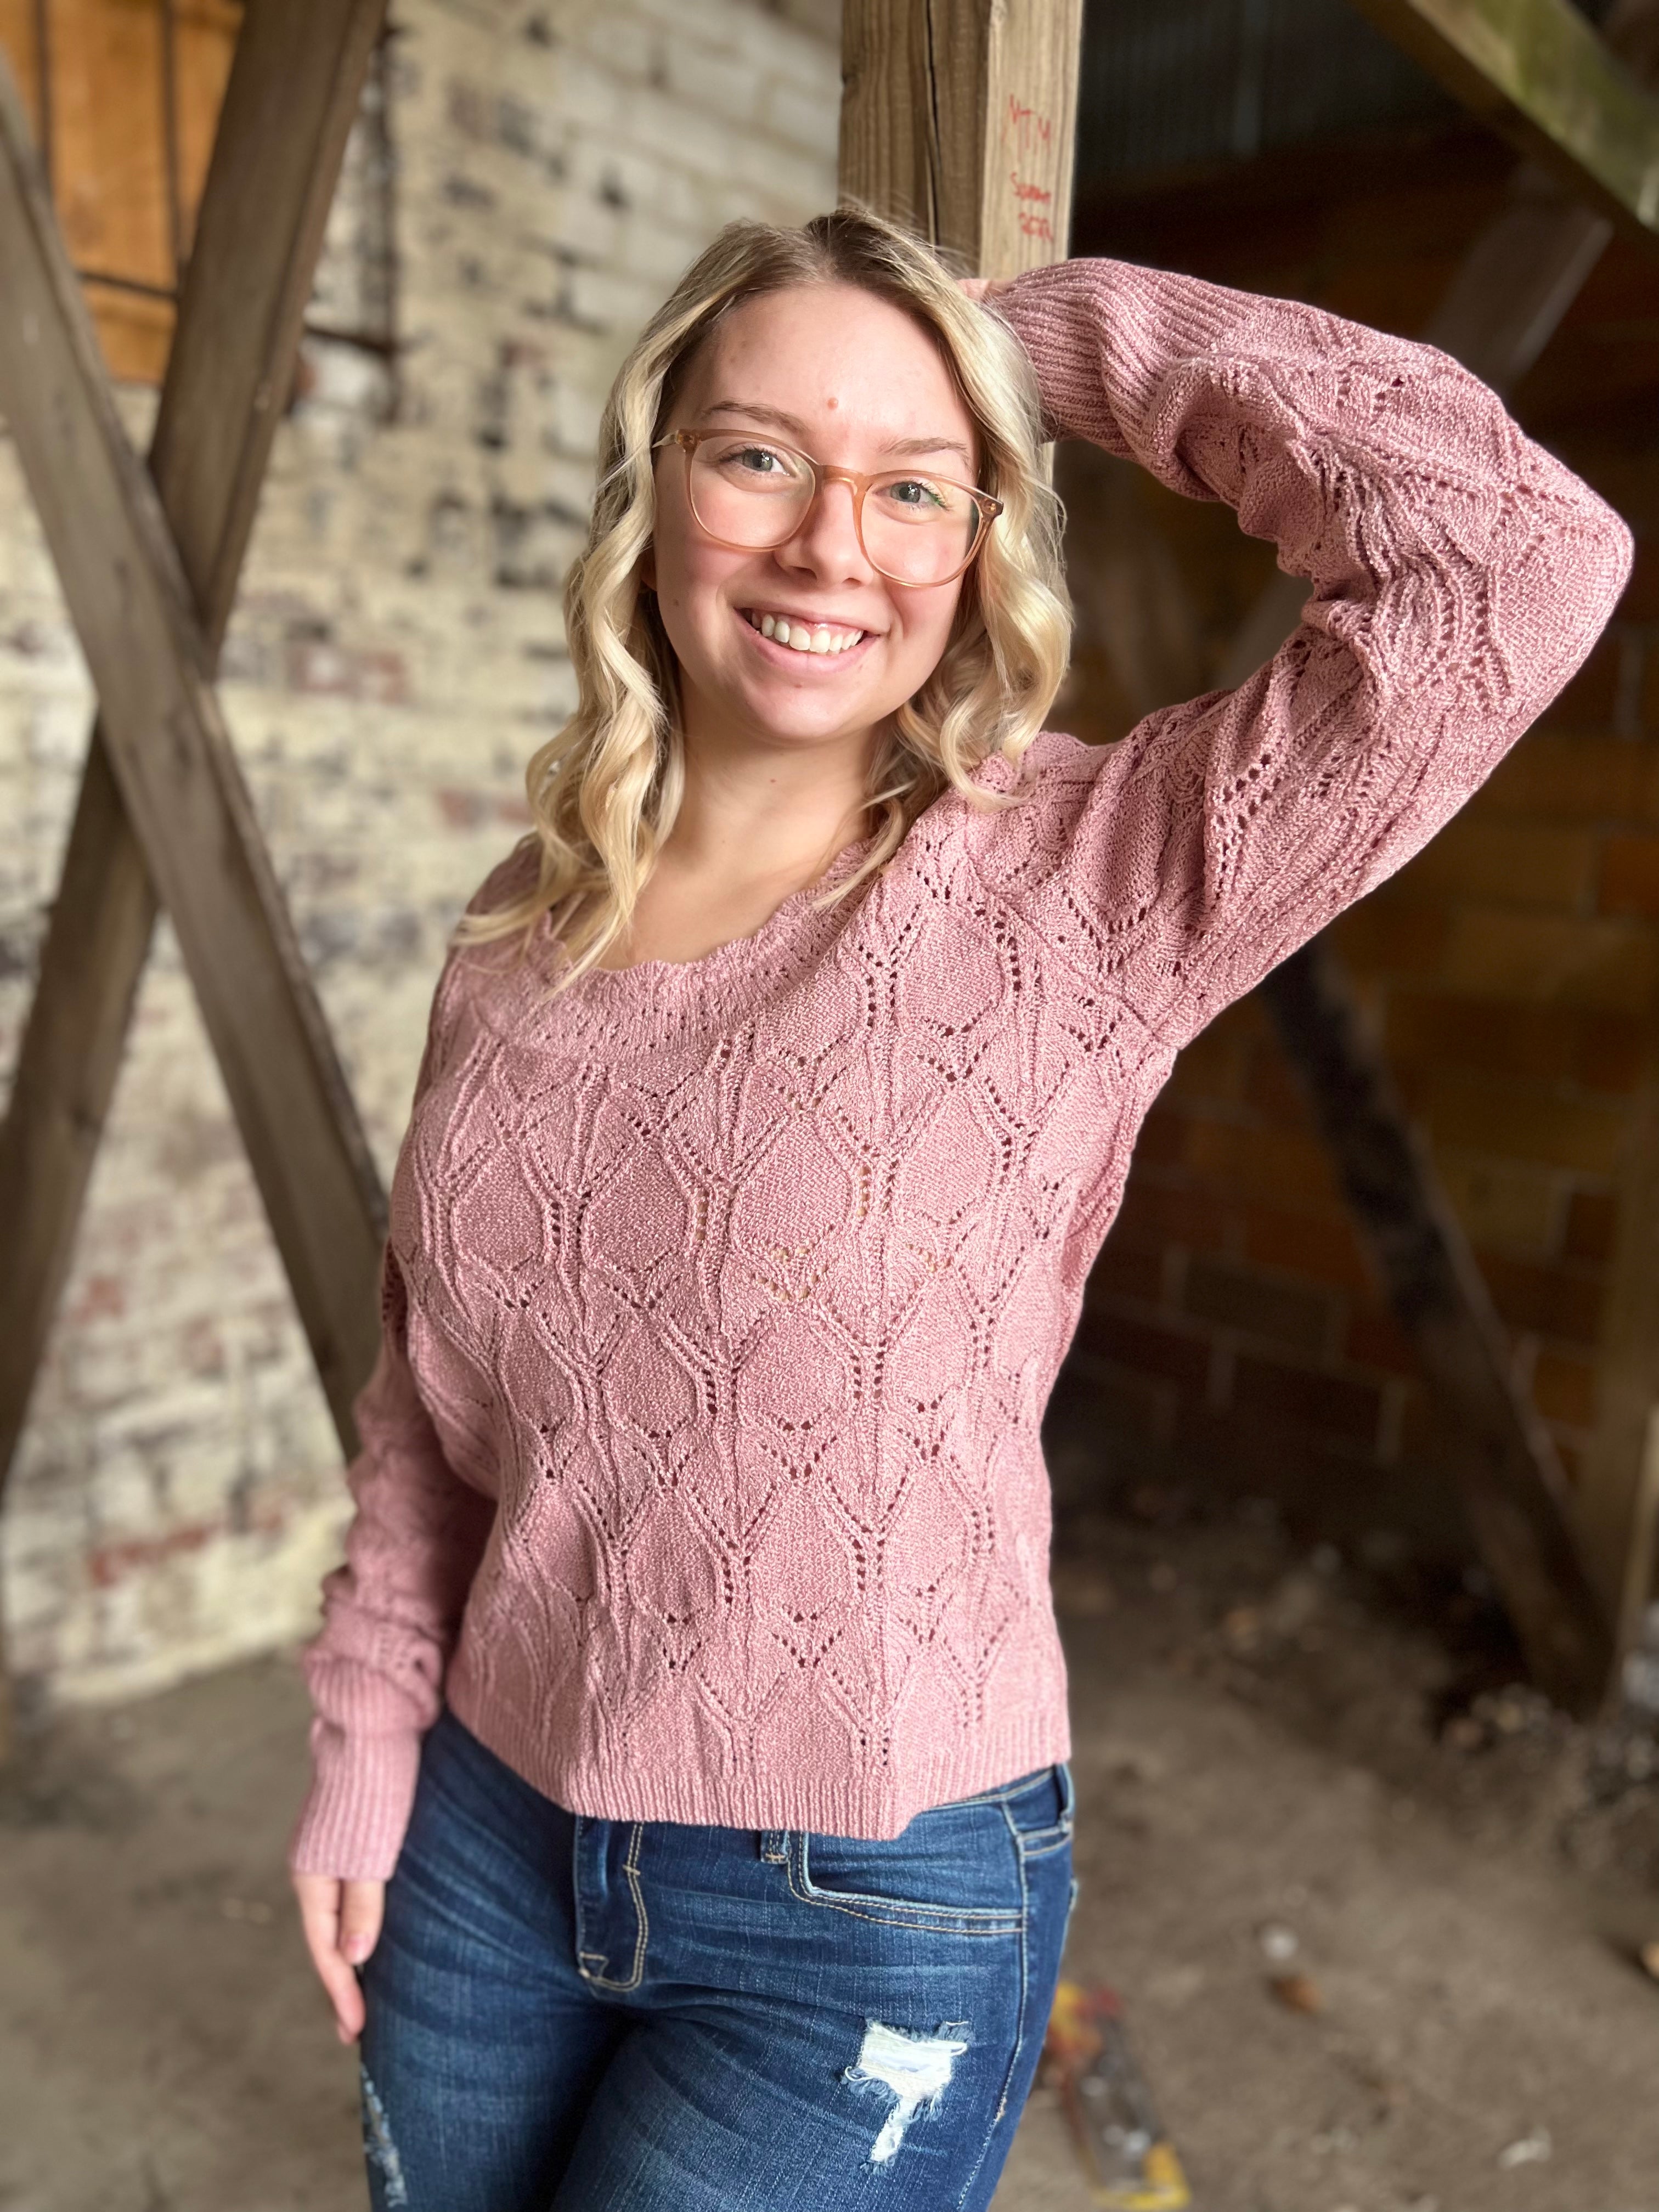 LACE BACK FANCY KNITTING PULLOVER